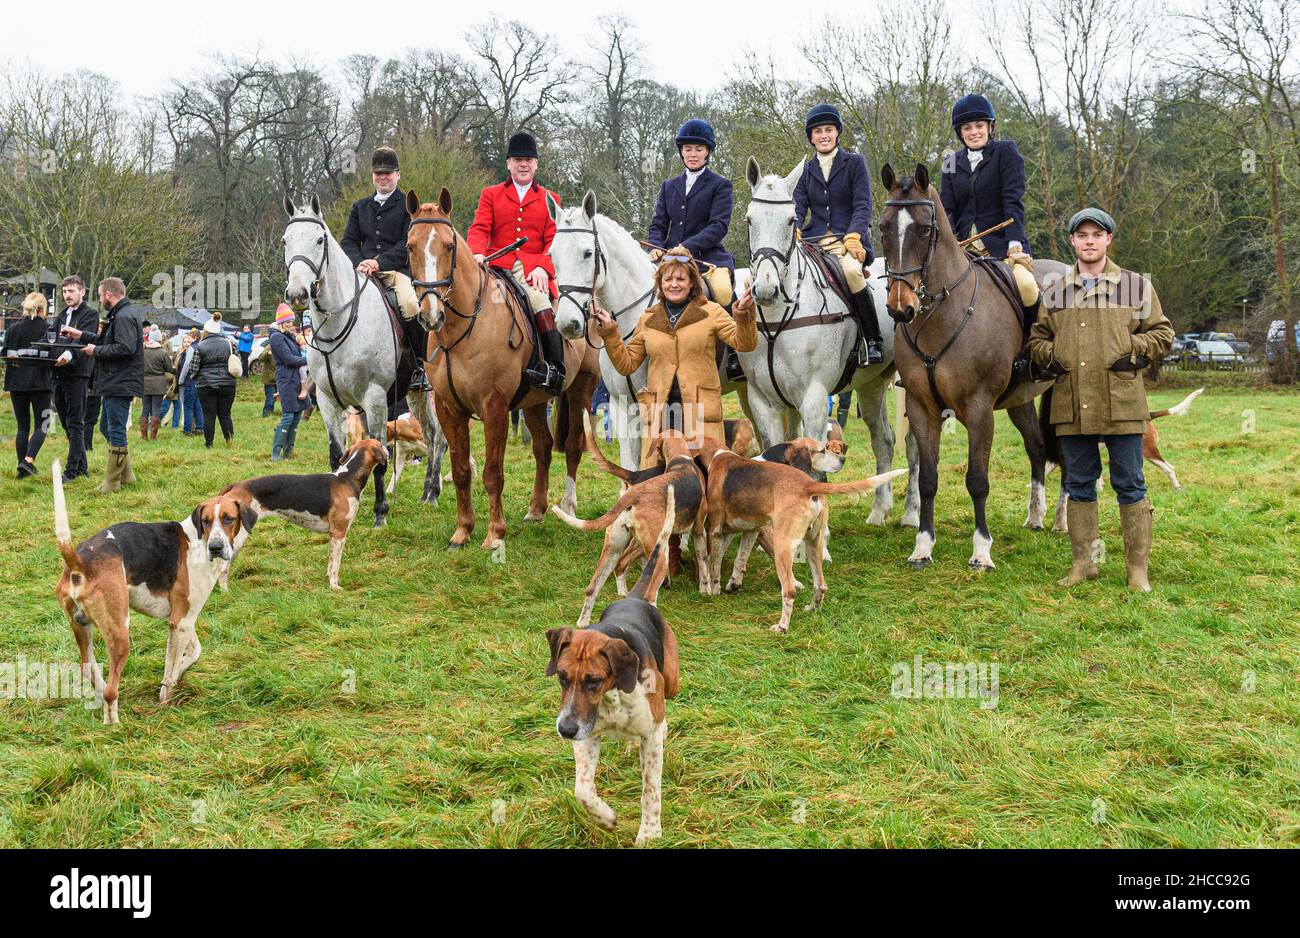 James Holliday, Huntsman John Holliday, Lady Alice Manners, Emma, Duchess of Rutland (on foot), Lady Eliza Manners, Lady Violet Manners, Charles, Marquis of Granby (on foot) at The Belvoir Hunt Boxing Day meet at The Belvoir Castle Engine Yard, Monday 27 December 2021 © 2021 Nico Morgan. All Rights Reserved Stock Photo